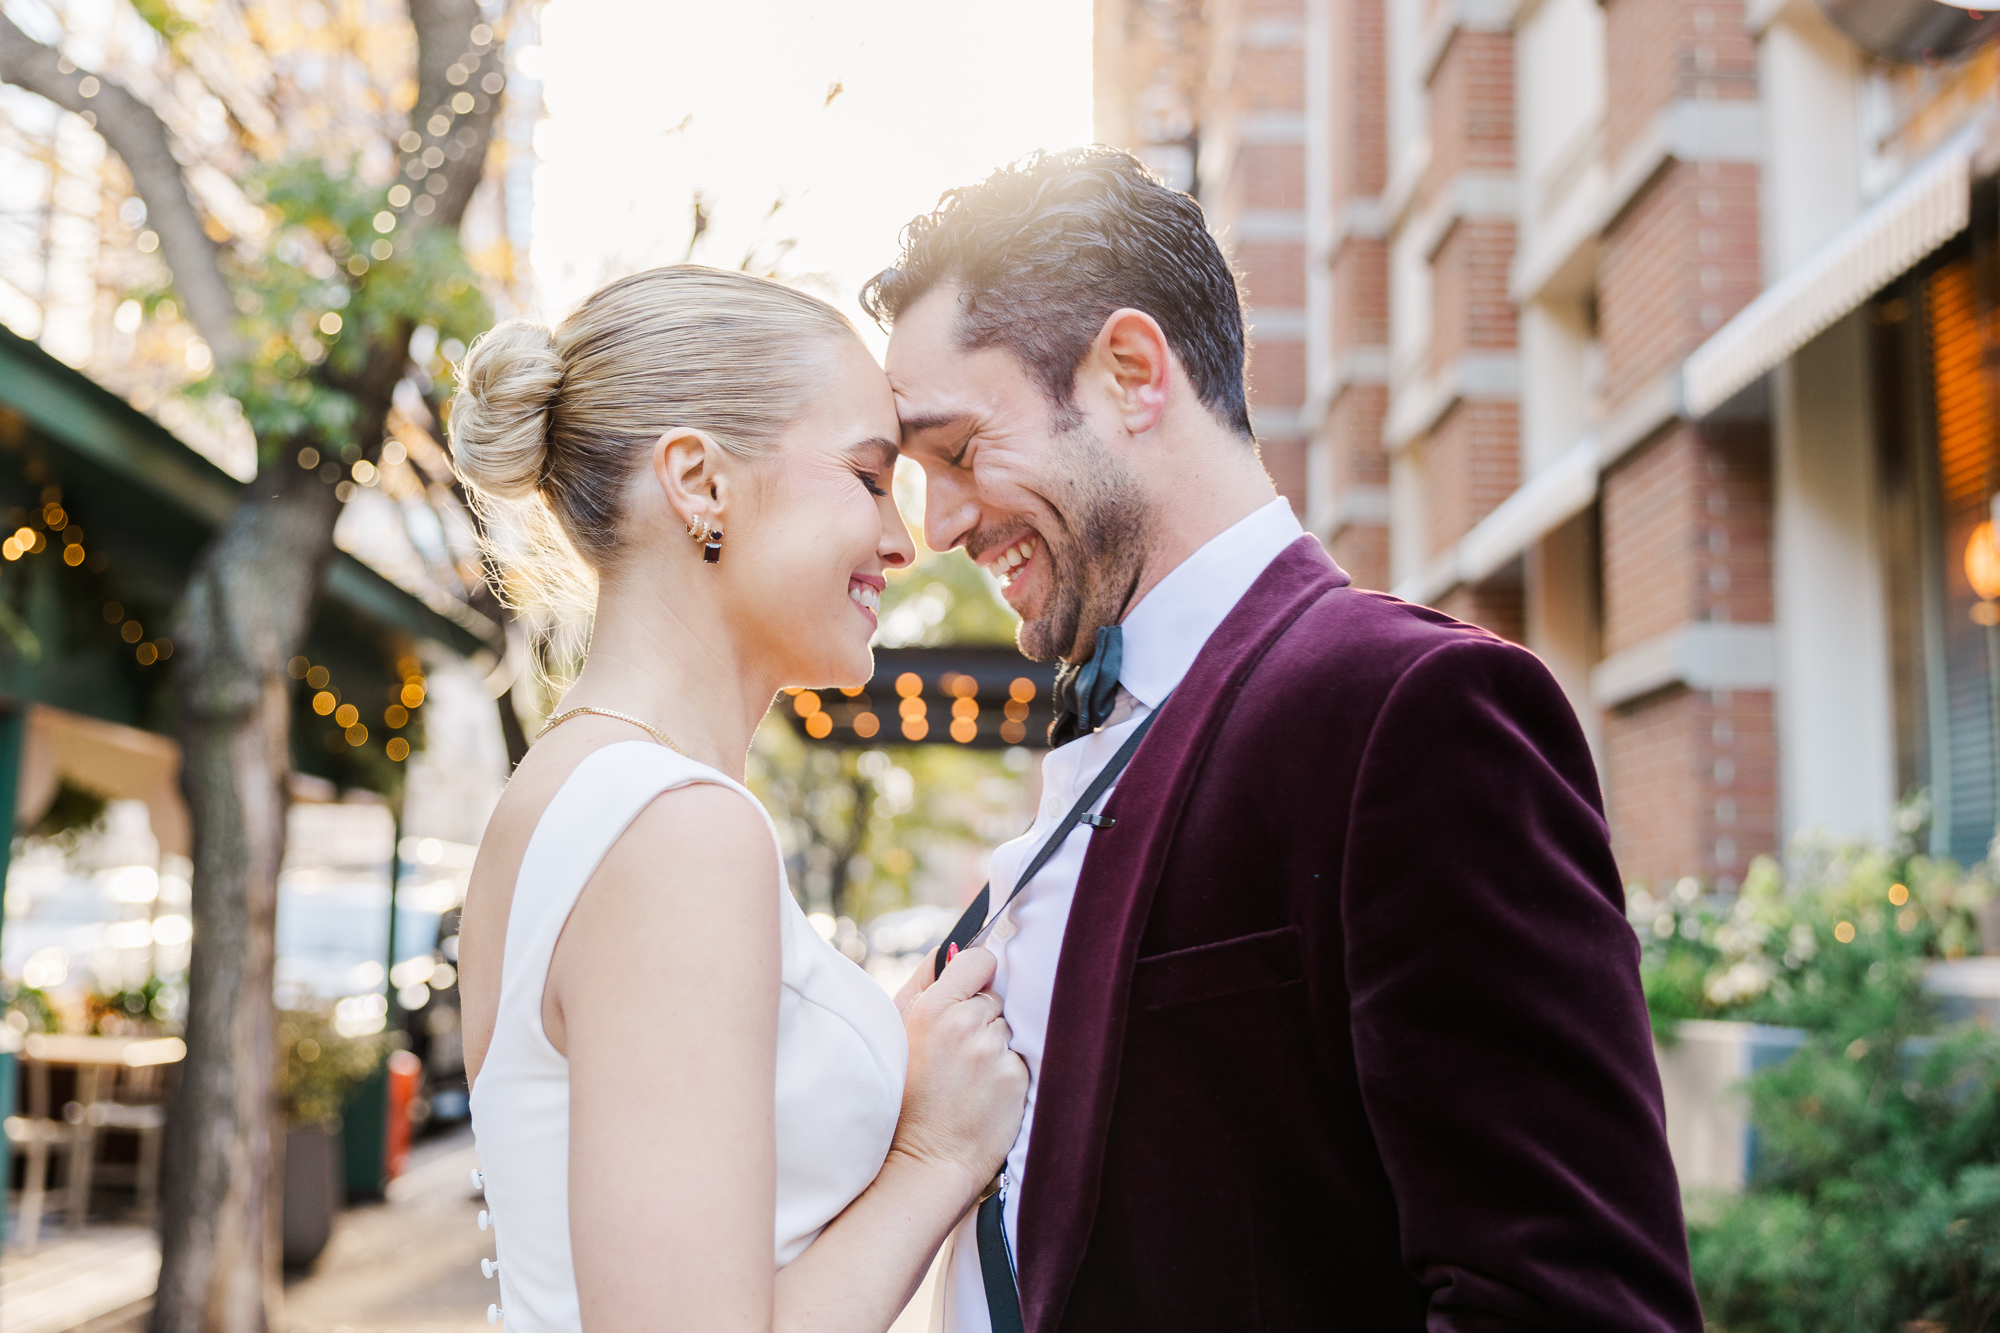 Glowing New York Wedding Photography at City Winery